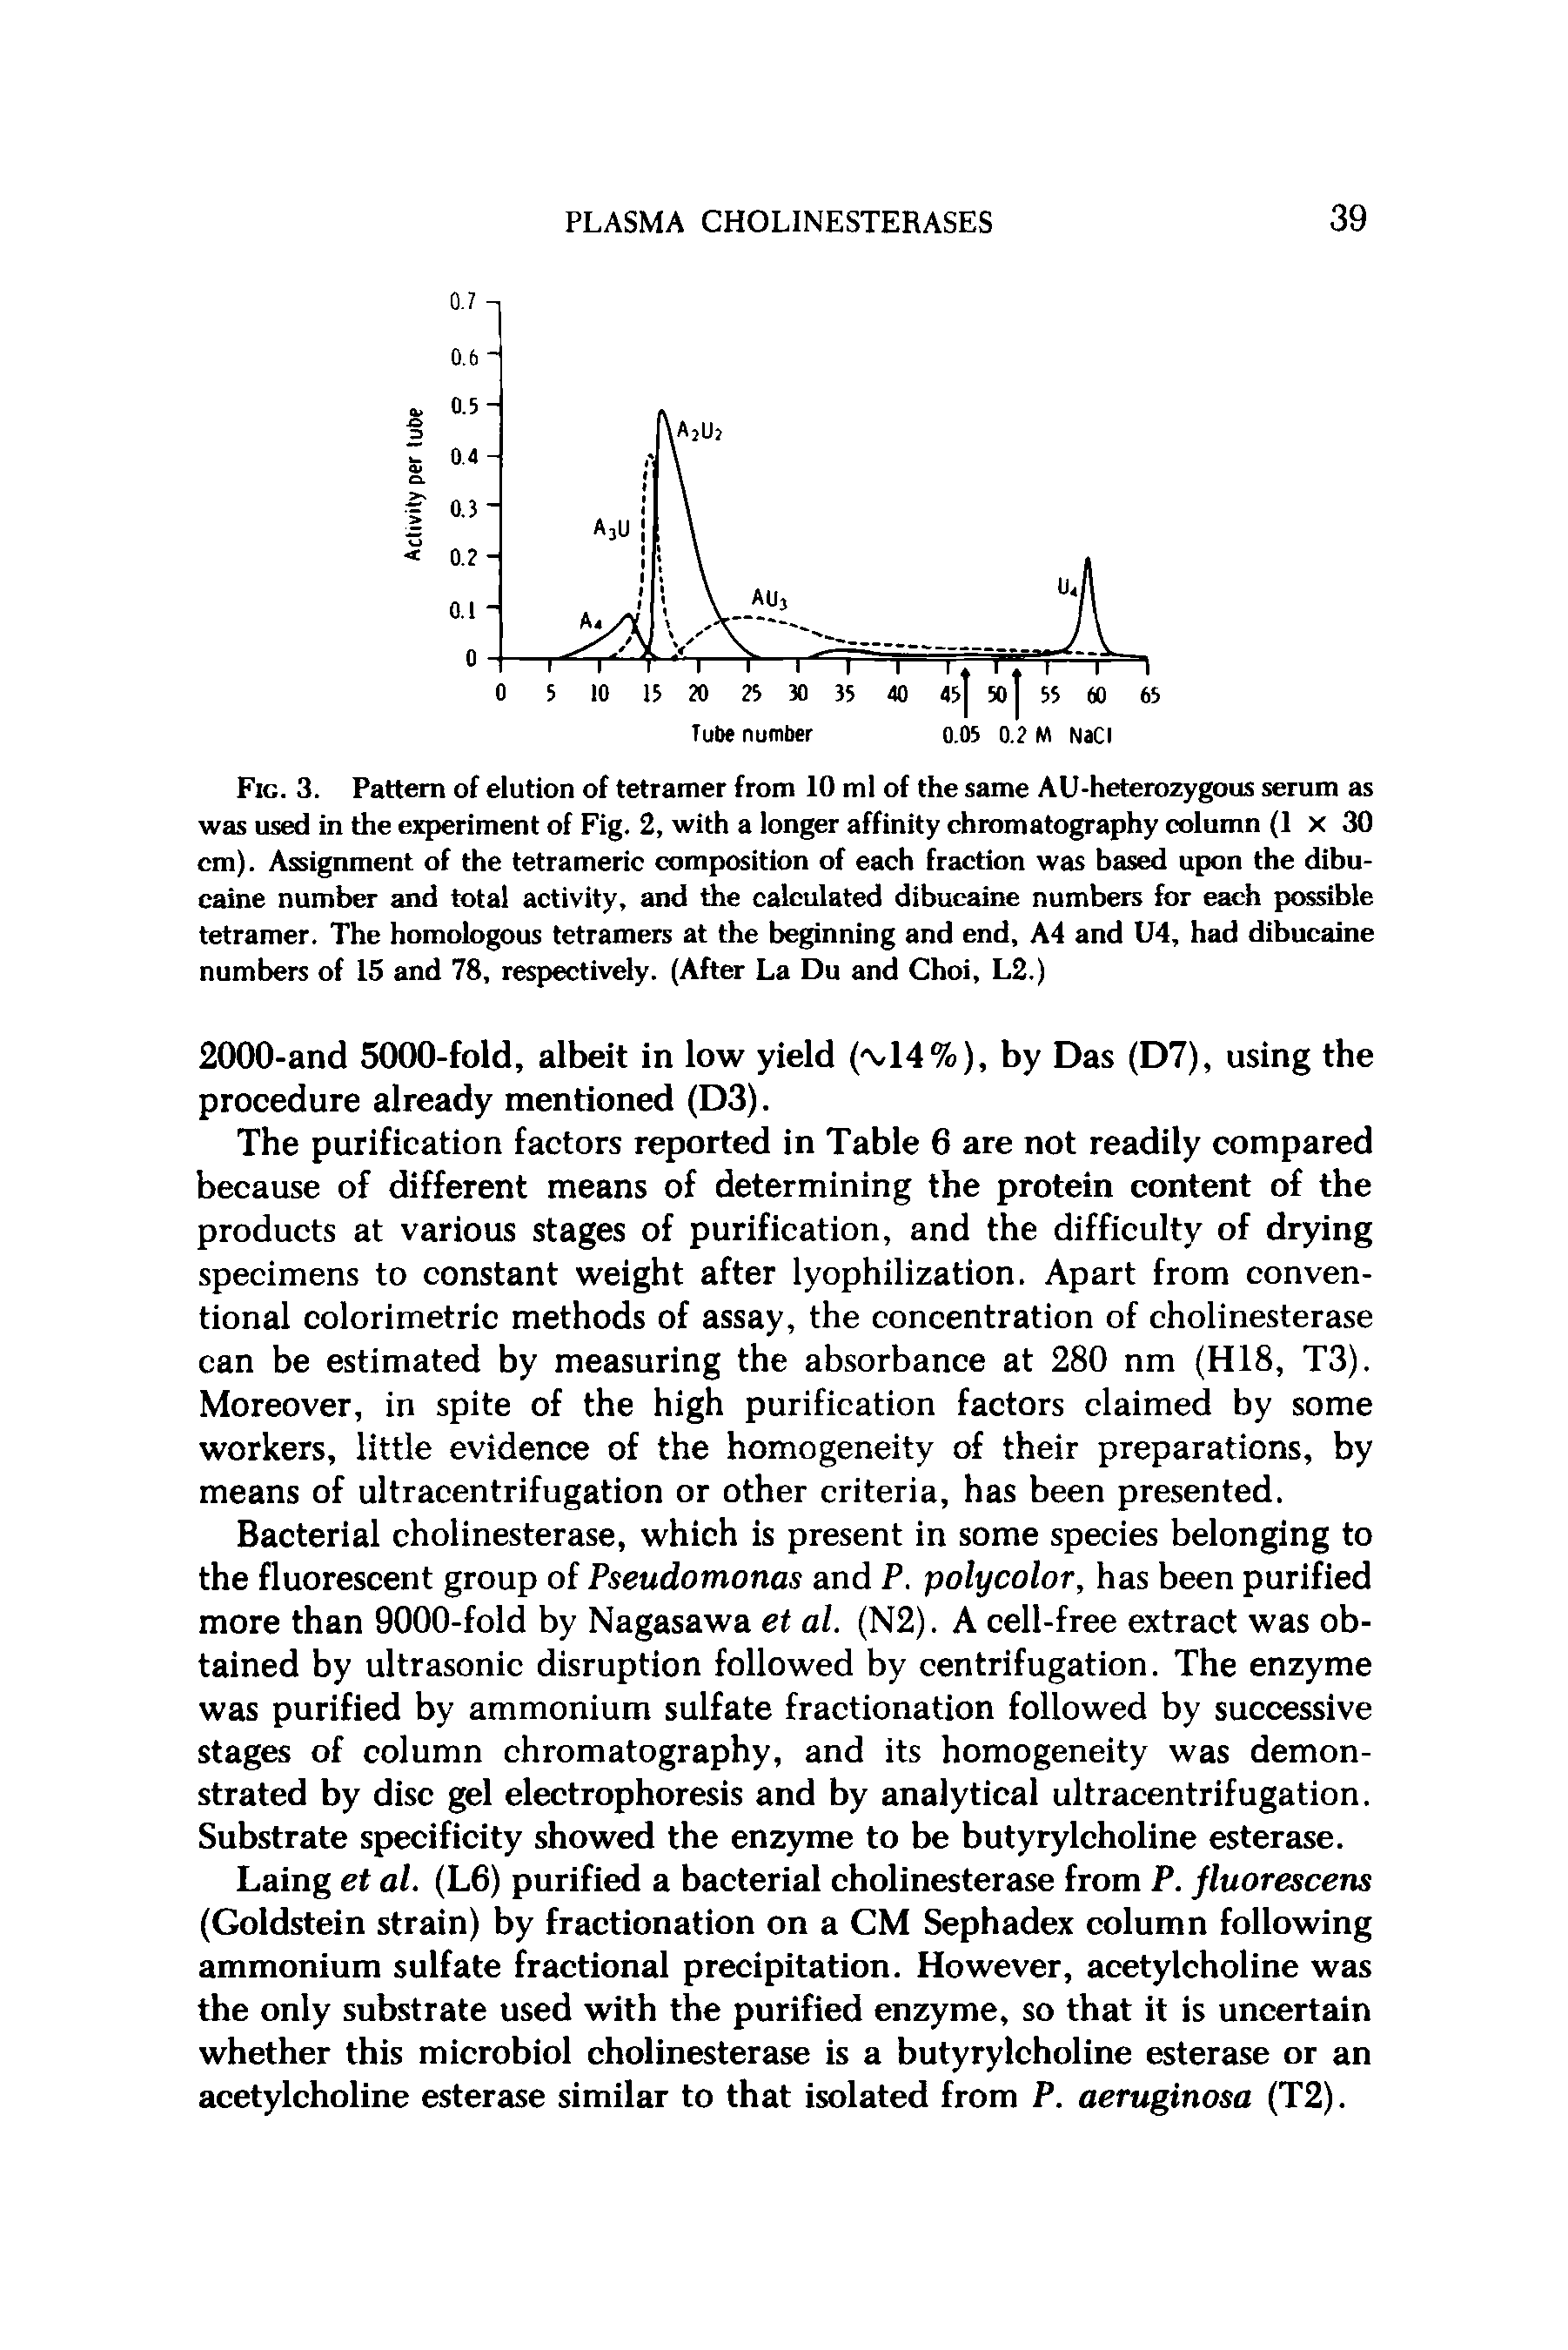 Fig. 3. Pattern of elution of tetramer from 10 ml of the same AU-heterozygous serum as was used in the experiment of Fig. 2, with a longer affinity chromatography column (1 x 30 cm). Assignment of the tetrameric composition of each fraction was based upon the dibu-caine number and total activity, and the calculated dibucaine numbers for each possible tetramer. The homologous tetramers at the beginning and end, A4 and U4, had dibucaine numbers of 15 and 78, respectively. (After La Du and Choi, L2.)...